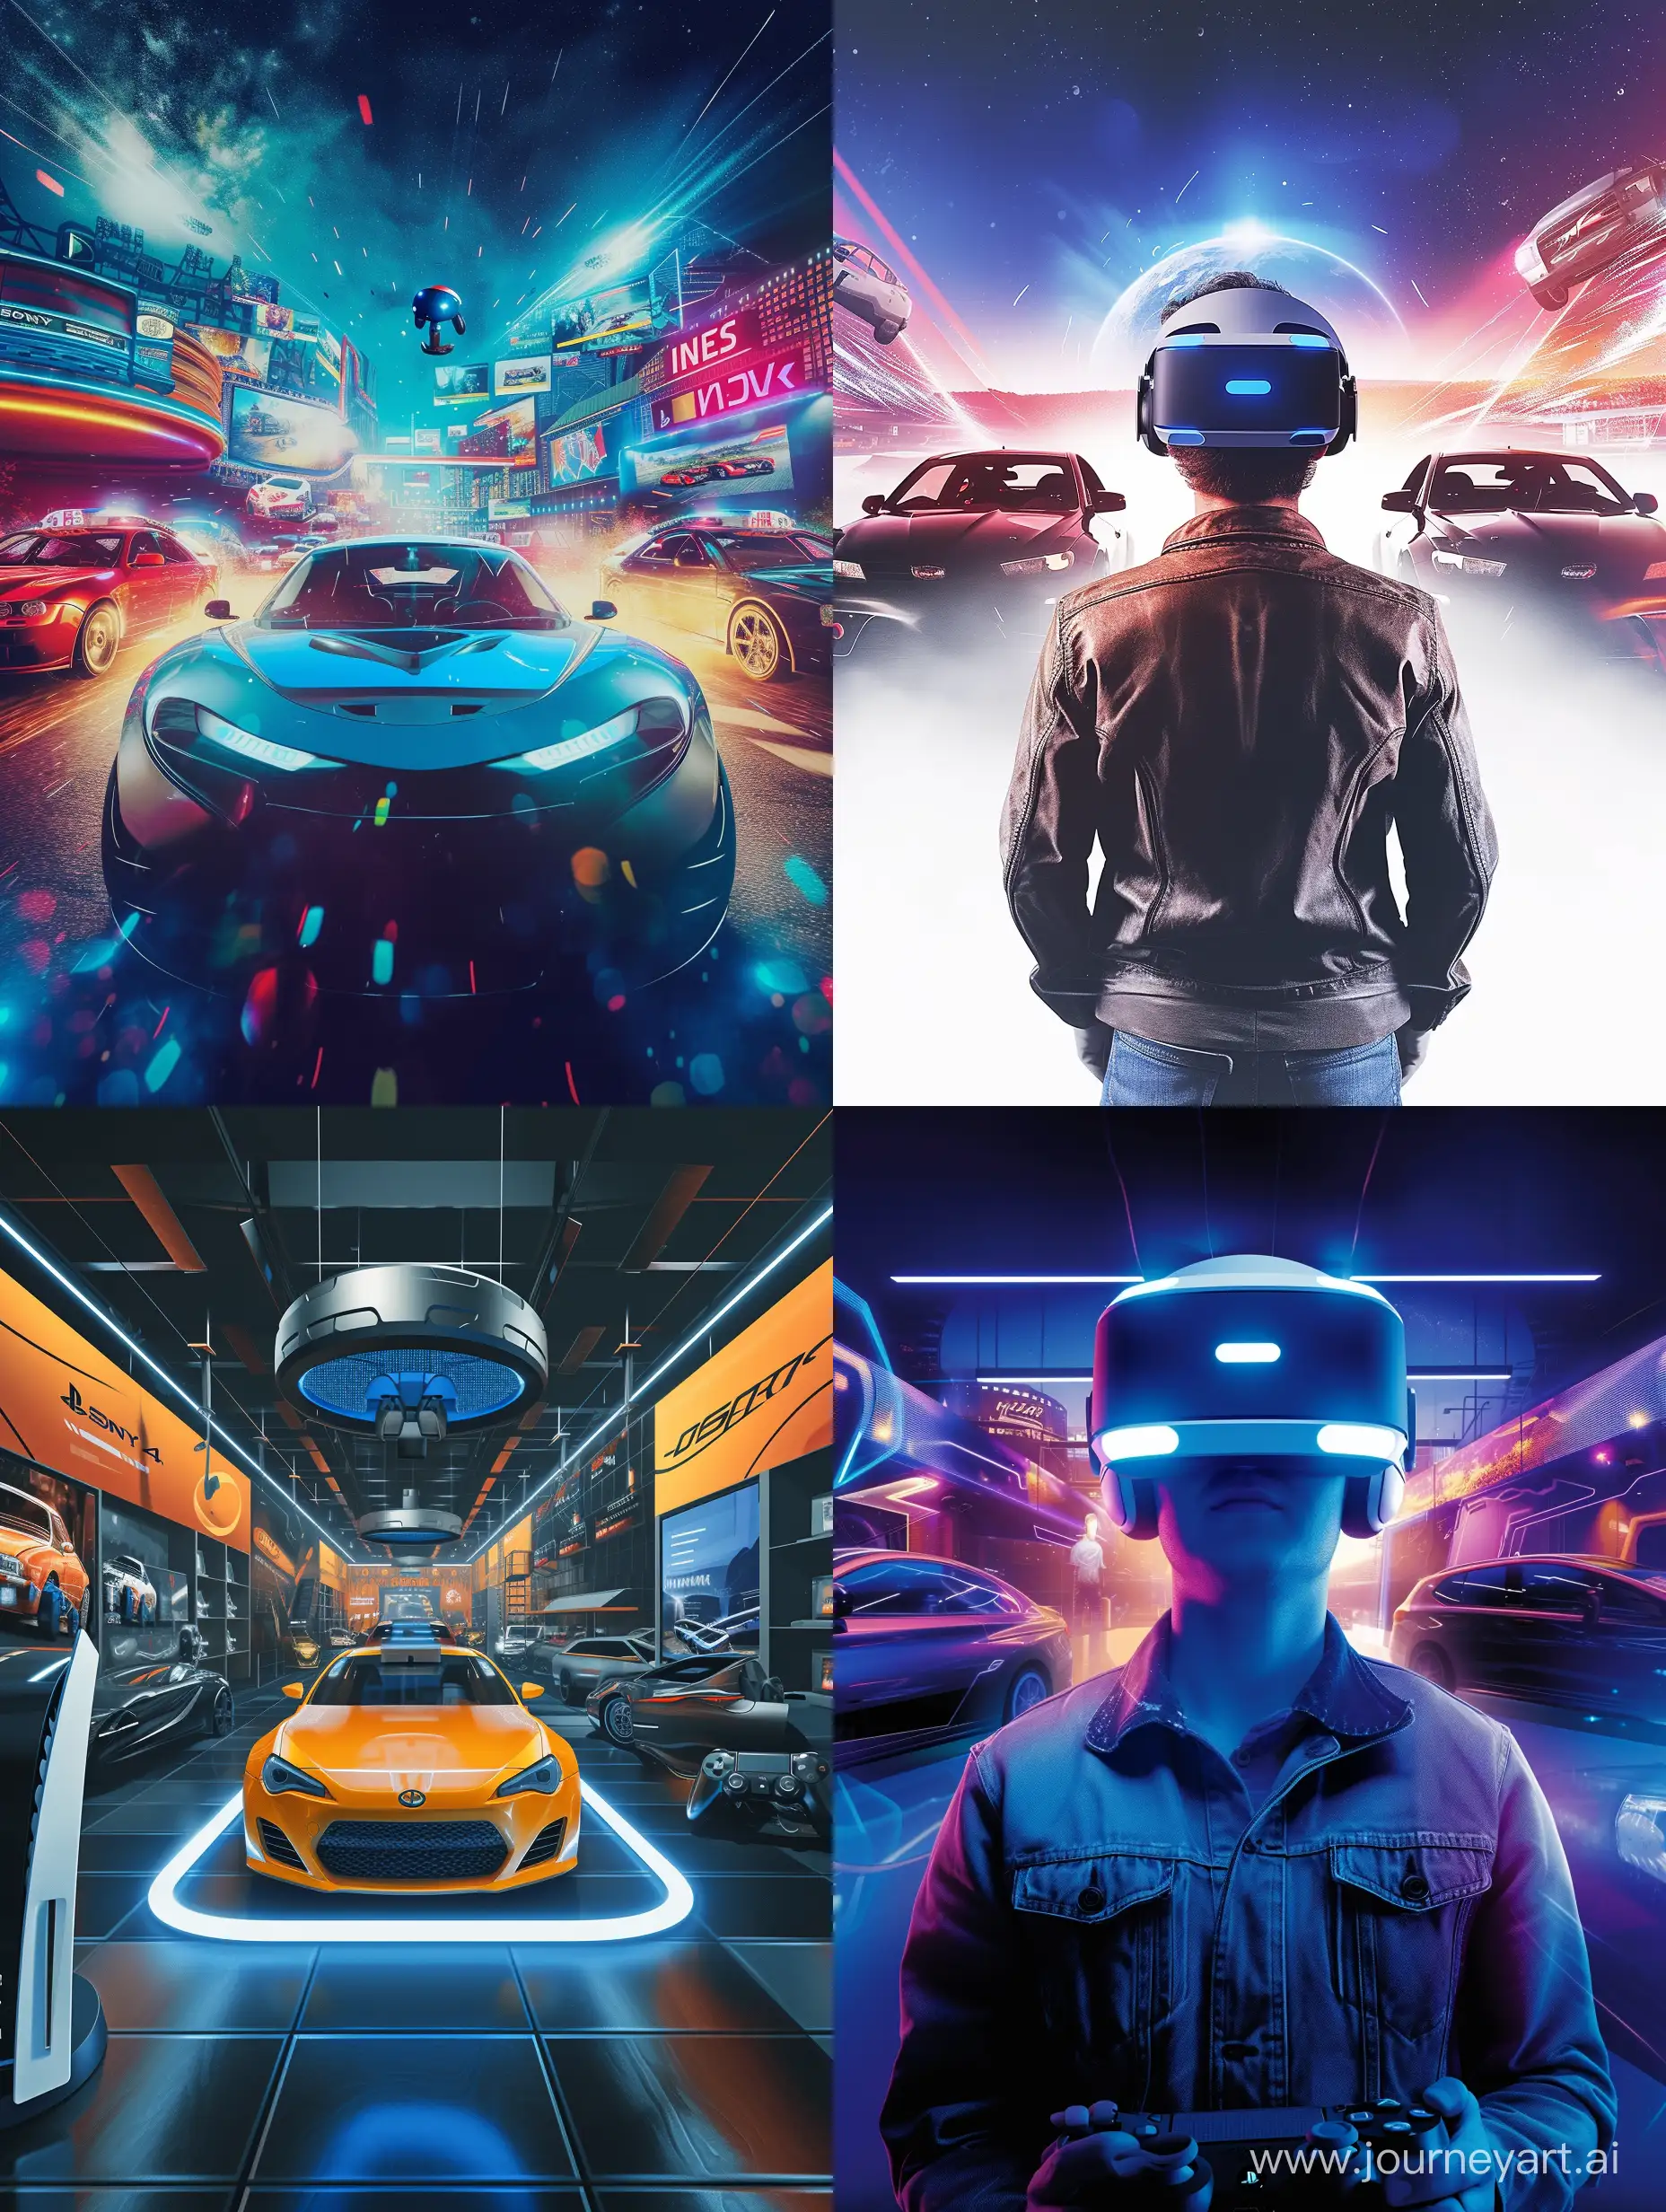 Immersive-Gaming-Experience-Car-Simulators-VR-Glasses-and-Sony-Playstation-4